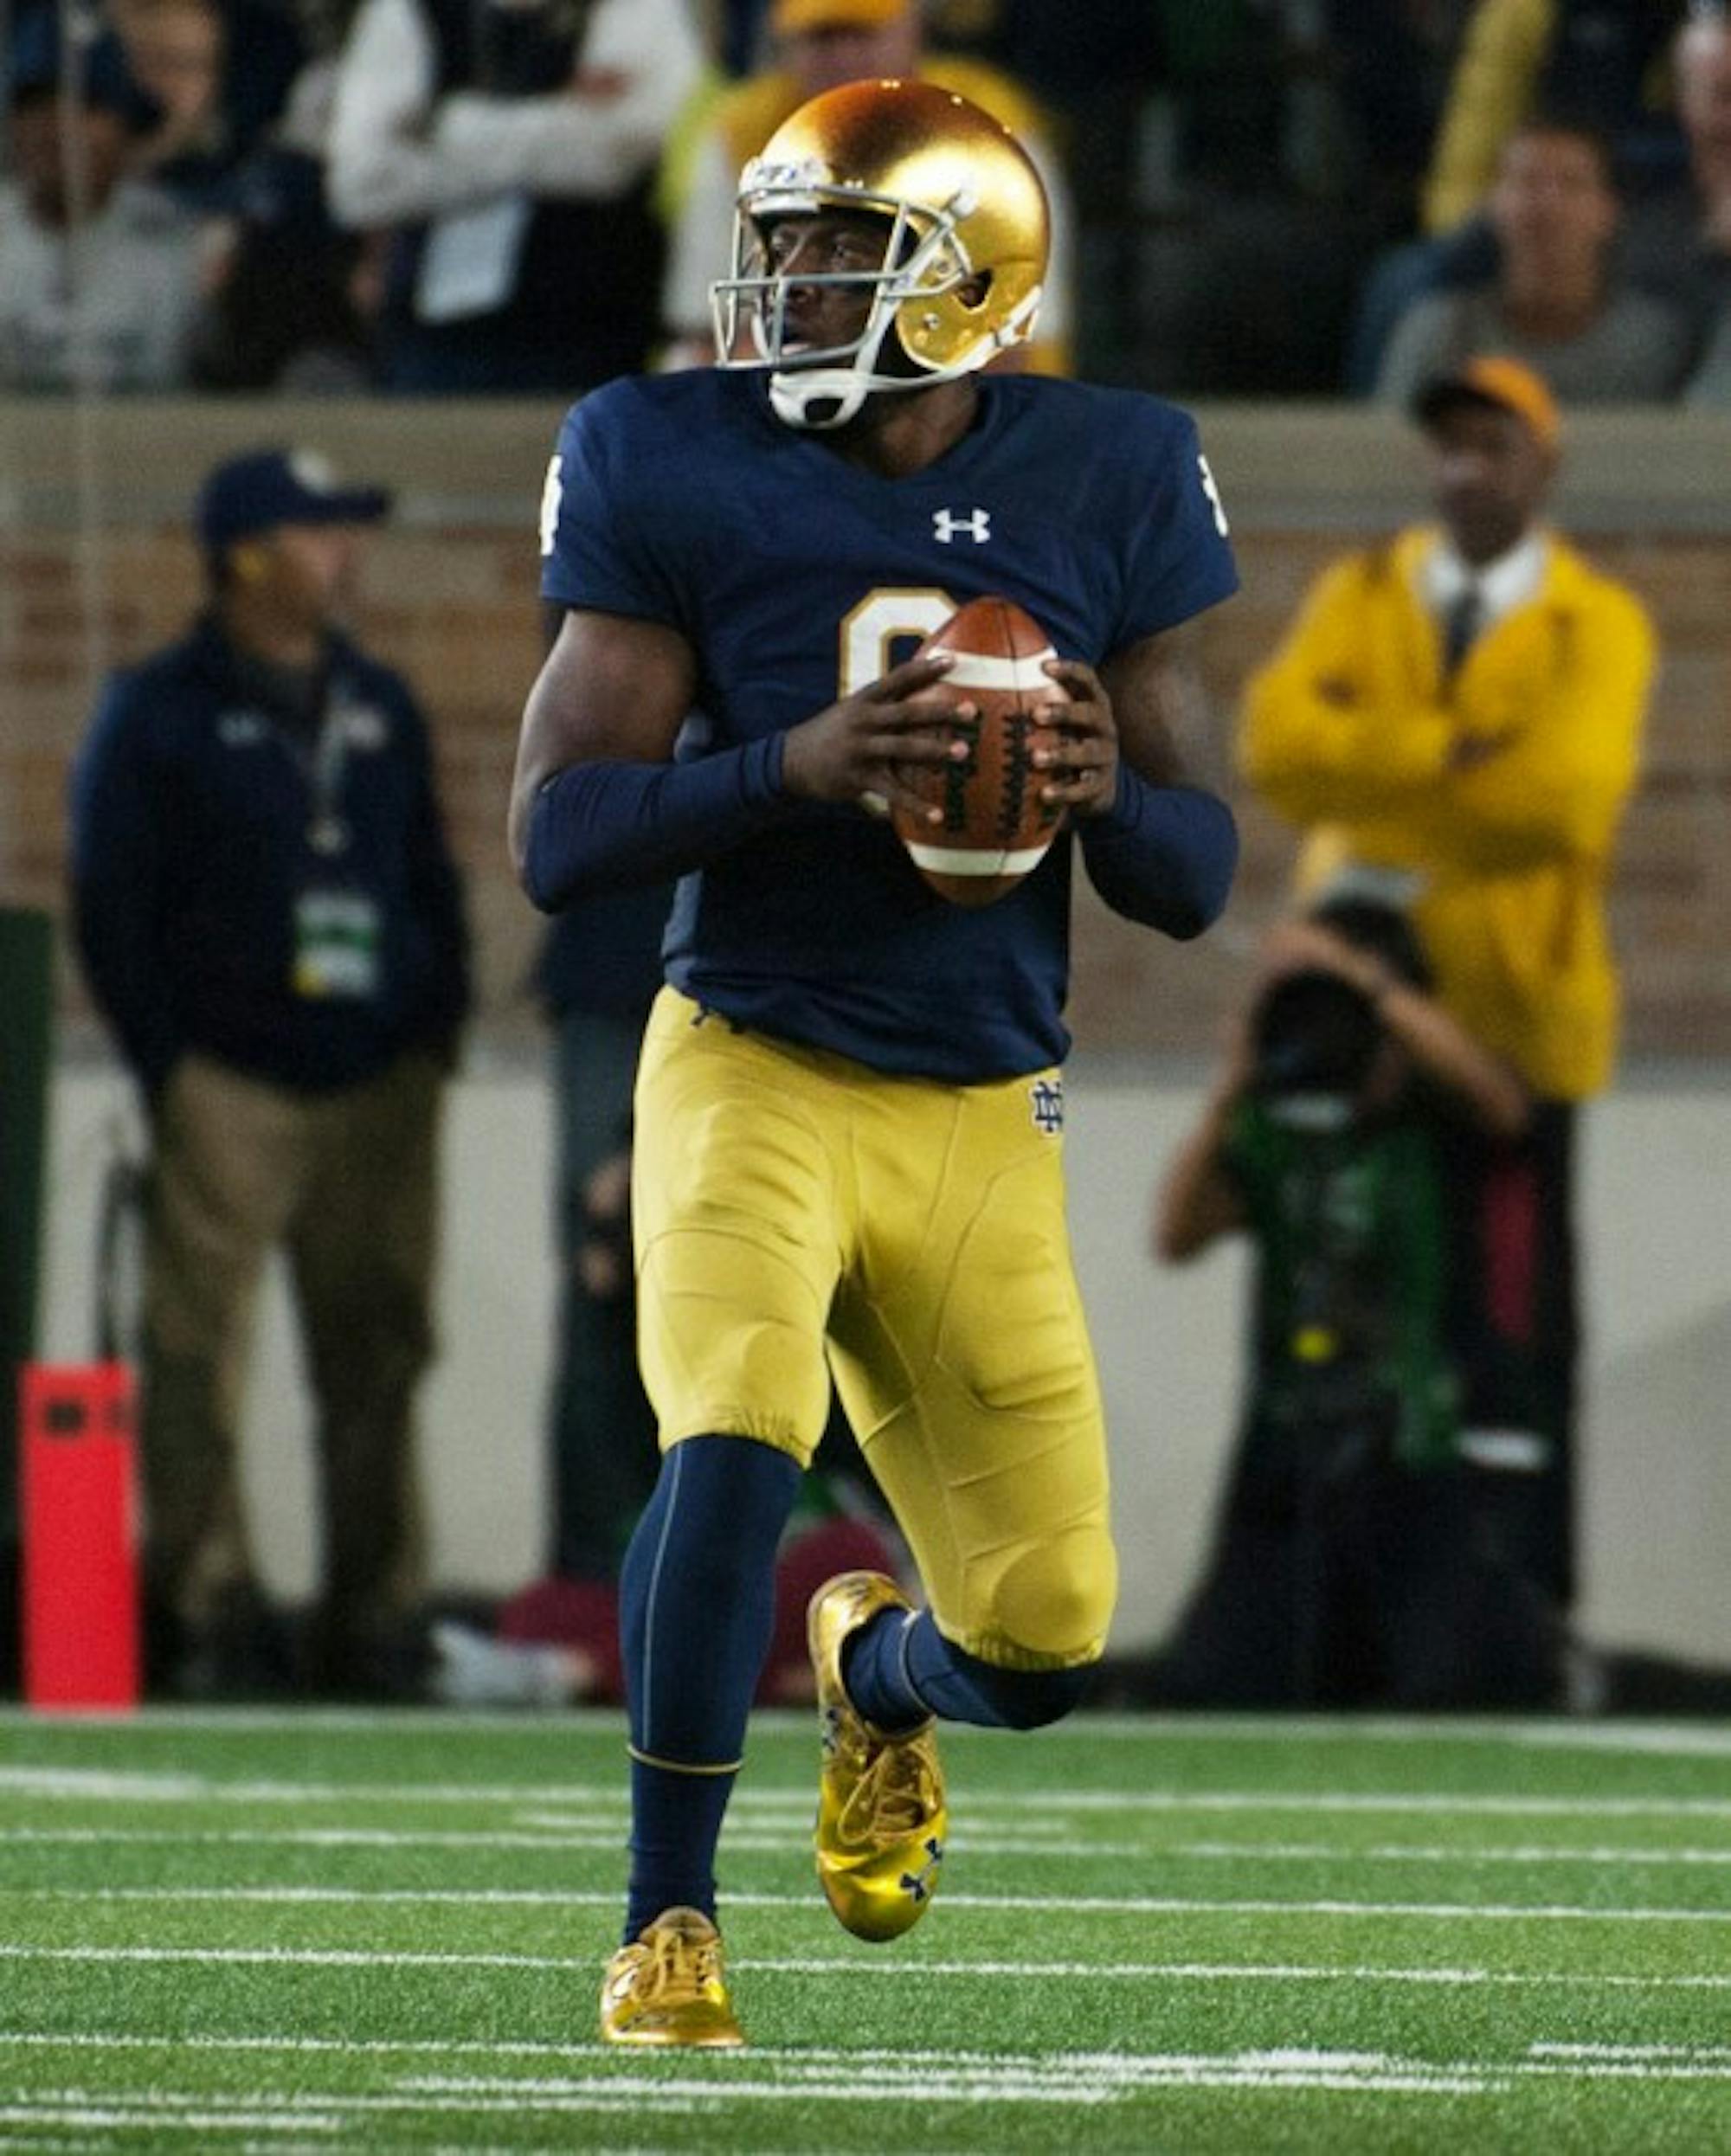 Senior quarterback Malik Zaire stands in the pocket in Notre Dame's 17-10 loss to Stanford on Saturday.